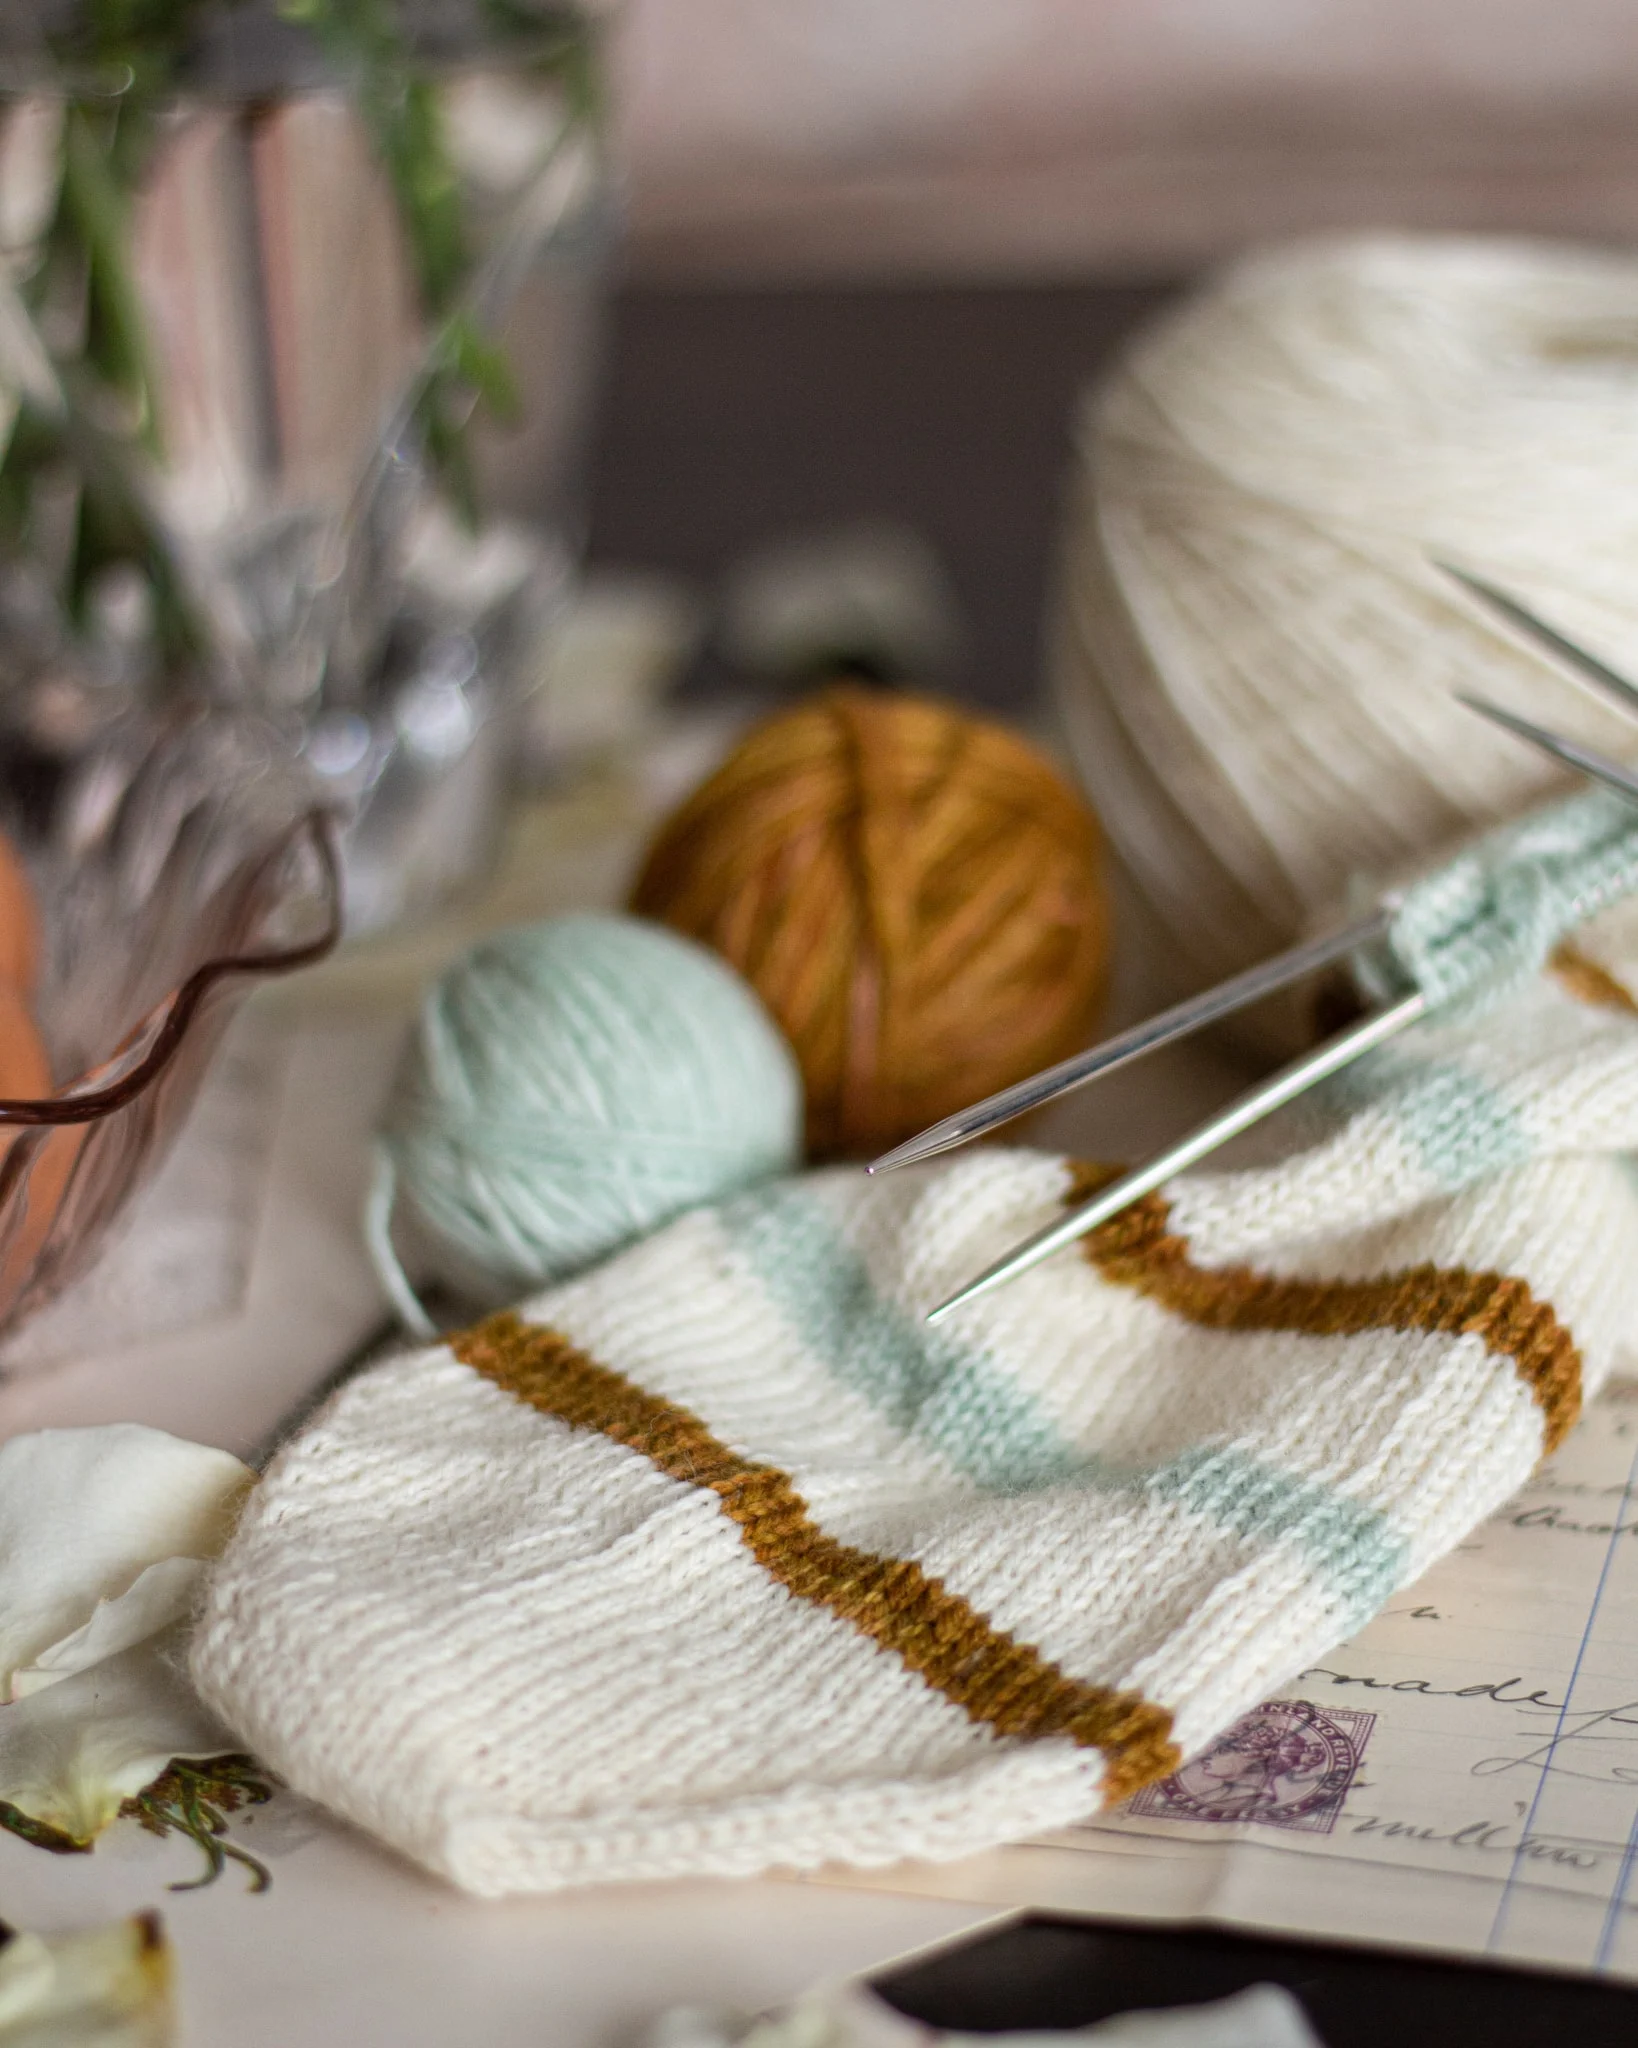 How to knit a rounded toe — Louise Tilbrook Designs